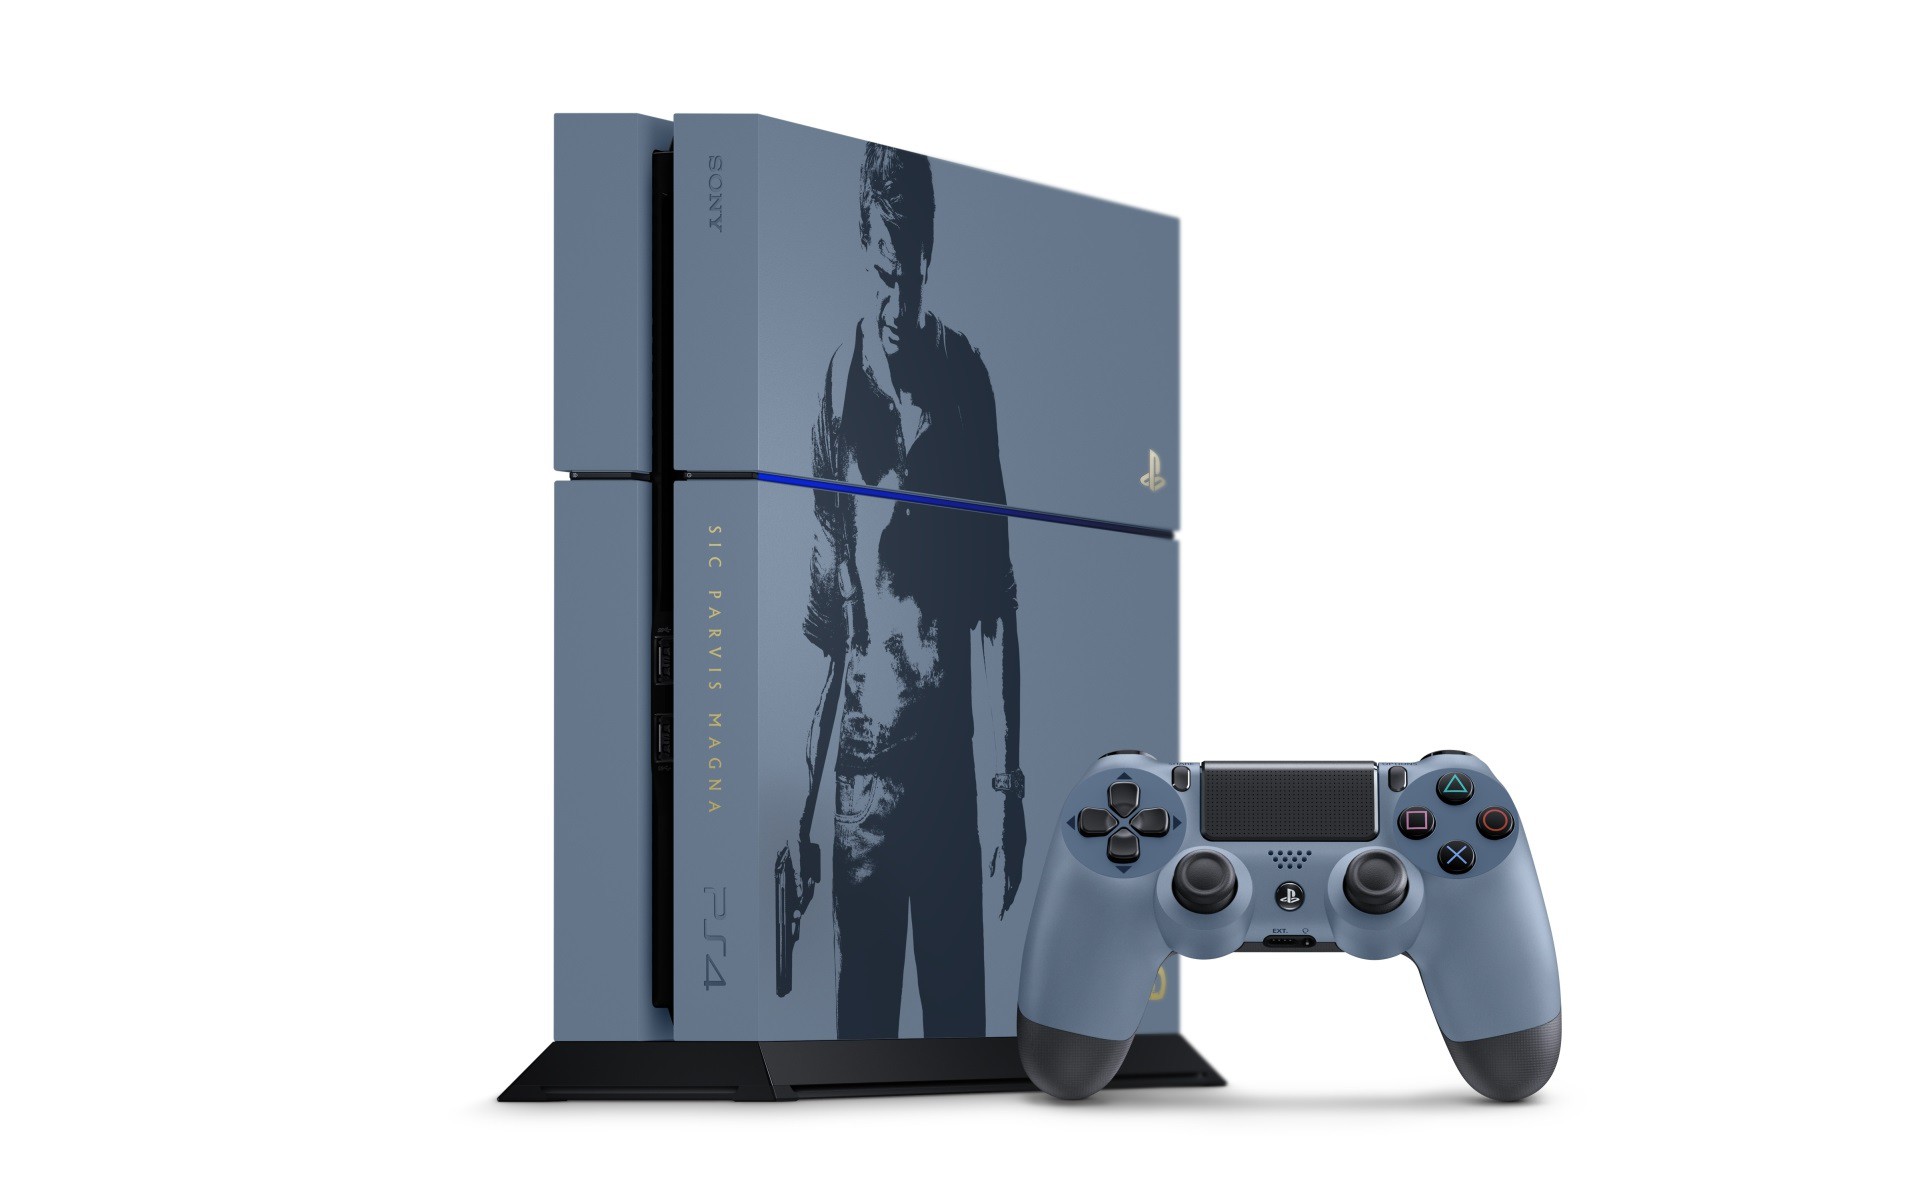 Картинка ps4. Ps4 Uncharted 4 Limited. Ps4 Uncharted 4 Limited Edition. Uncharted 4 ps4. PLAYSTATION 4 Uncharted Edition.